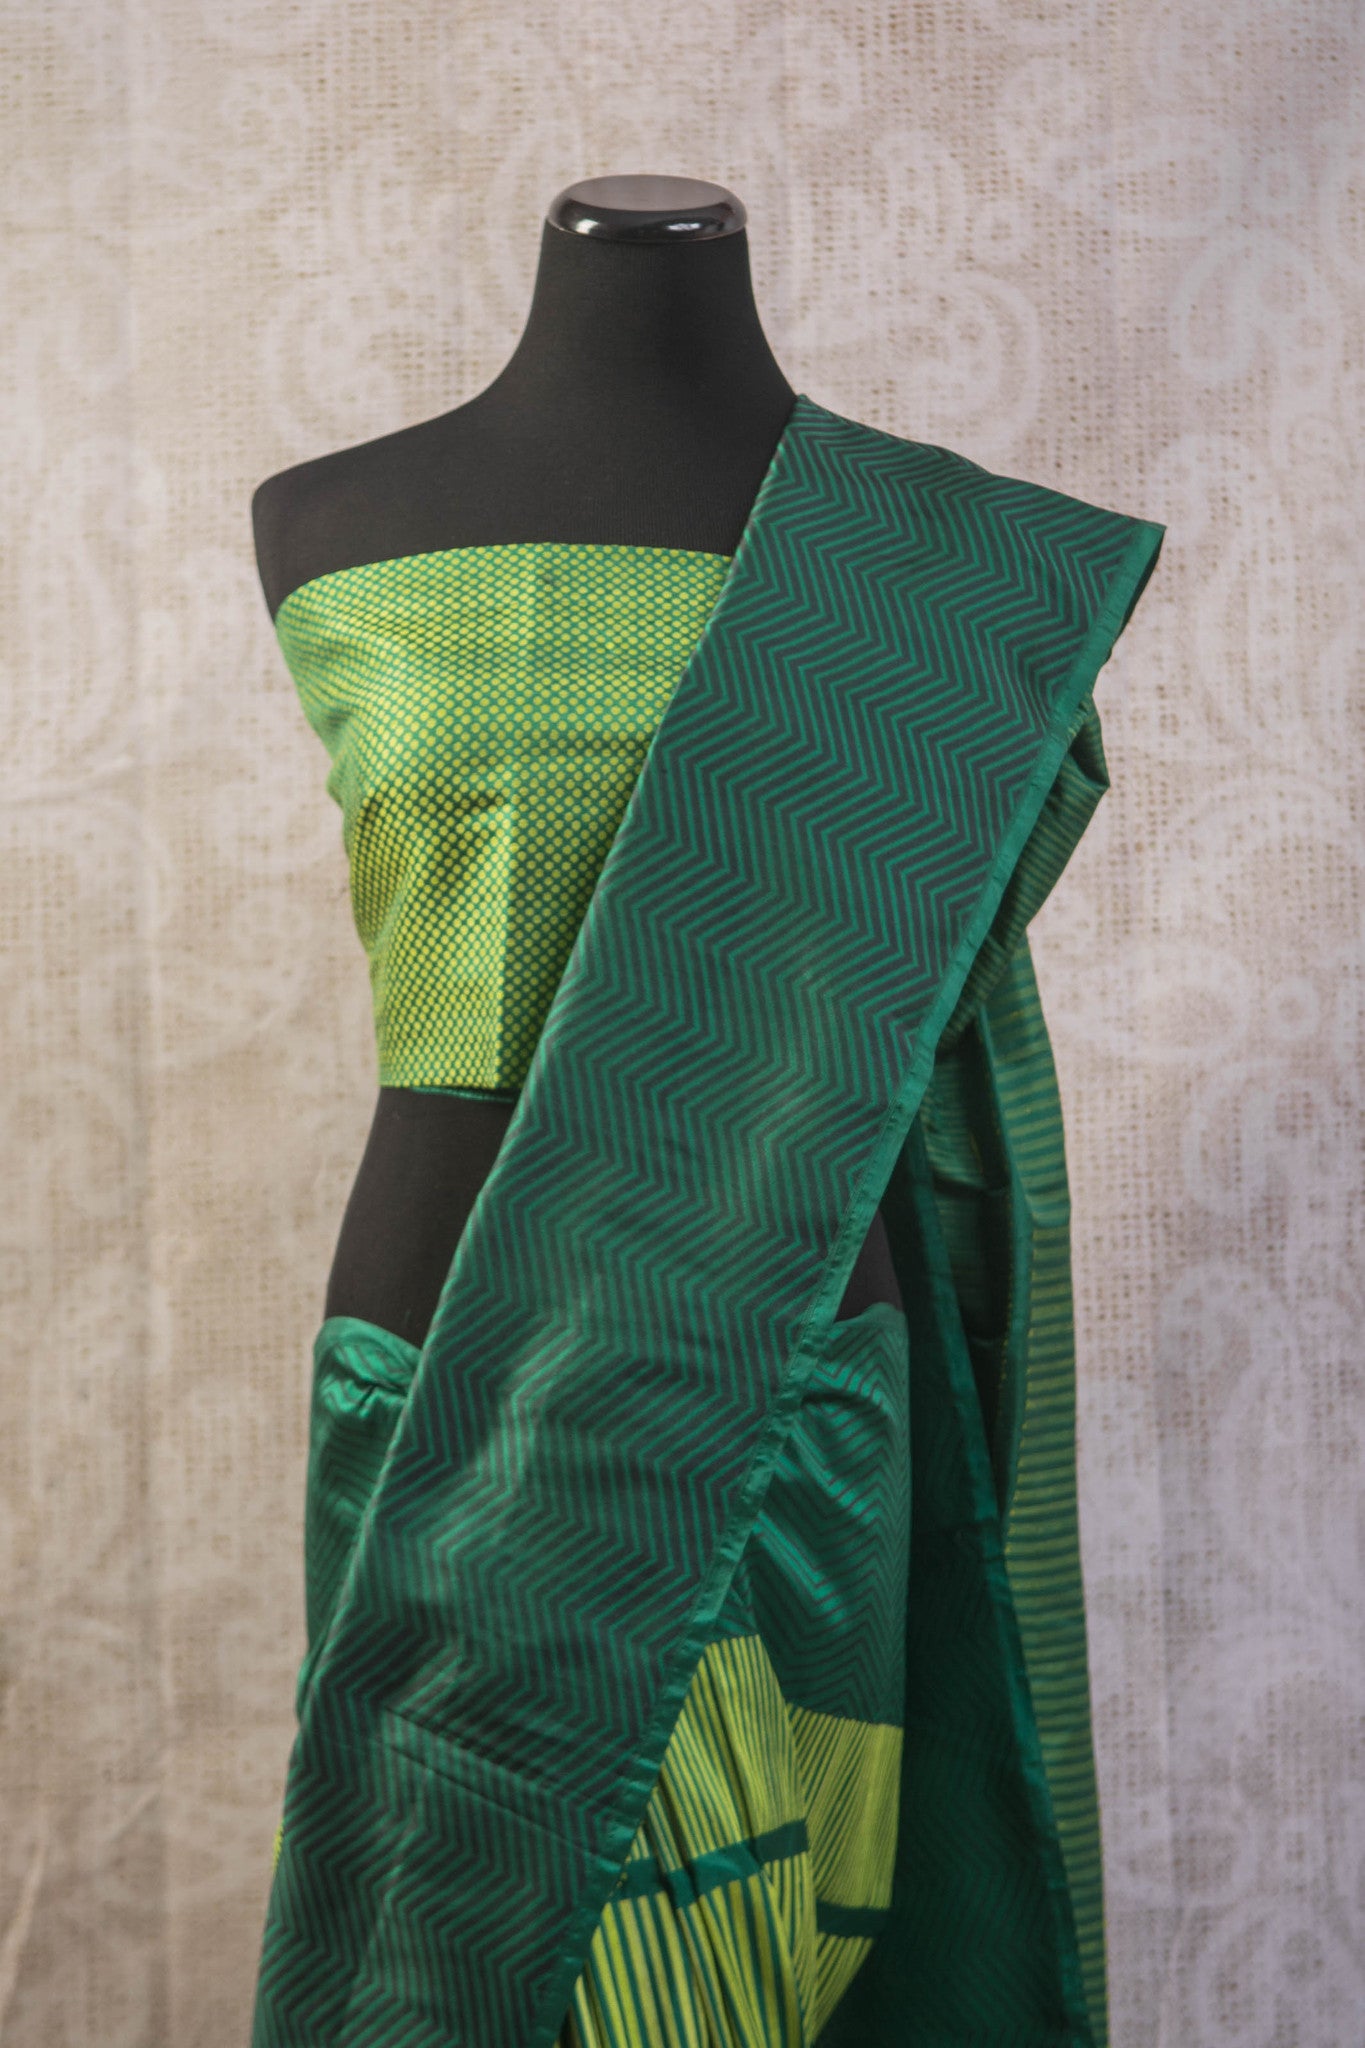 90b256 Multi green Banarasi silk saree with zig zag stripes & satin black pallu. The simple sari is available at our Indian clothing store in USA, Pure Elegance. This ethnic outfit is a great pick for parties, get-togethers and functions!